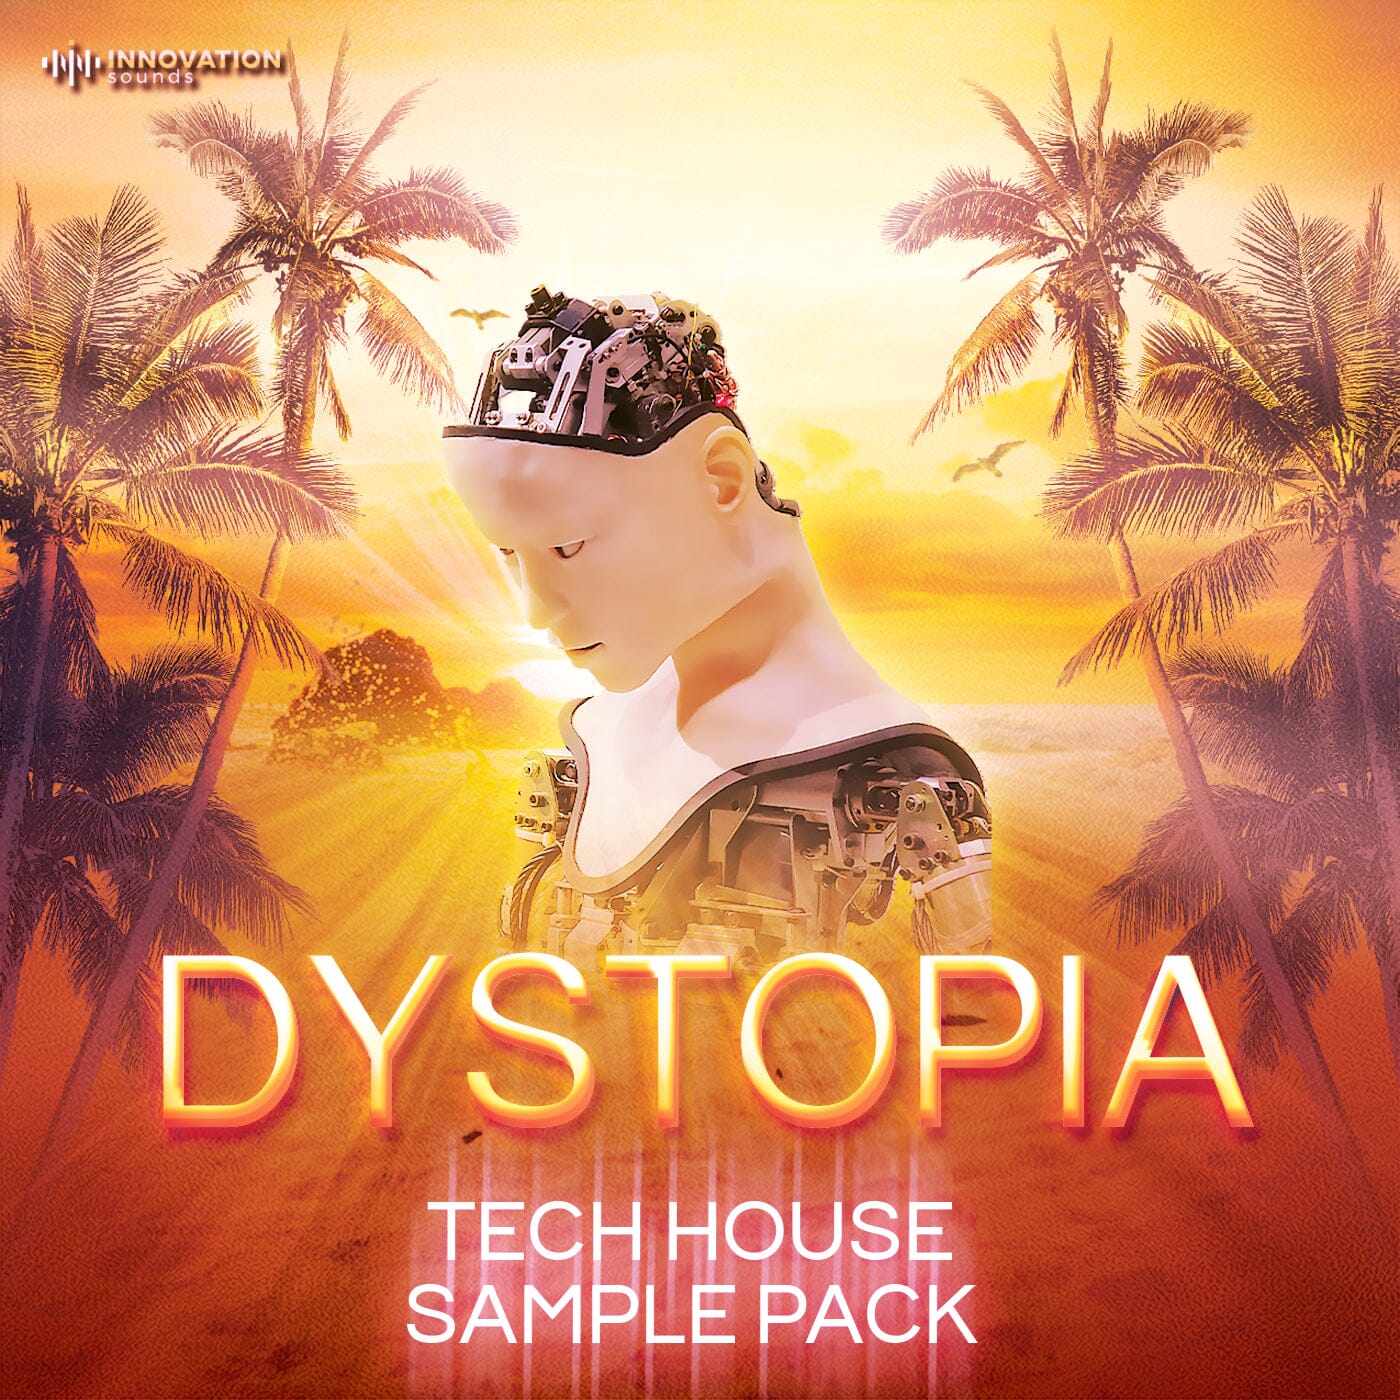 Dystopia - Techno and Tech House Sample Pack (WAV and MIDI Files) Sample Pack Innovation Sounds